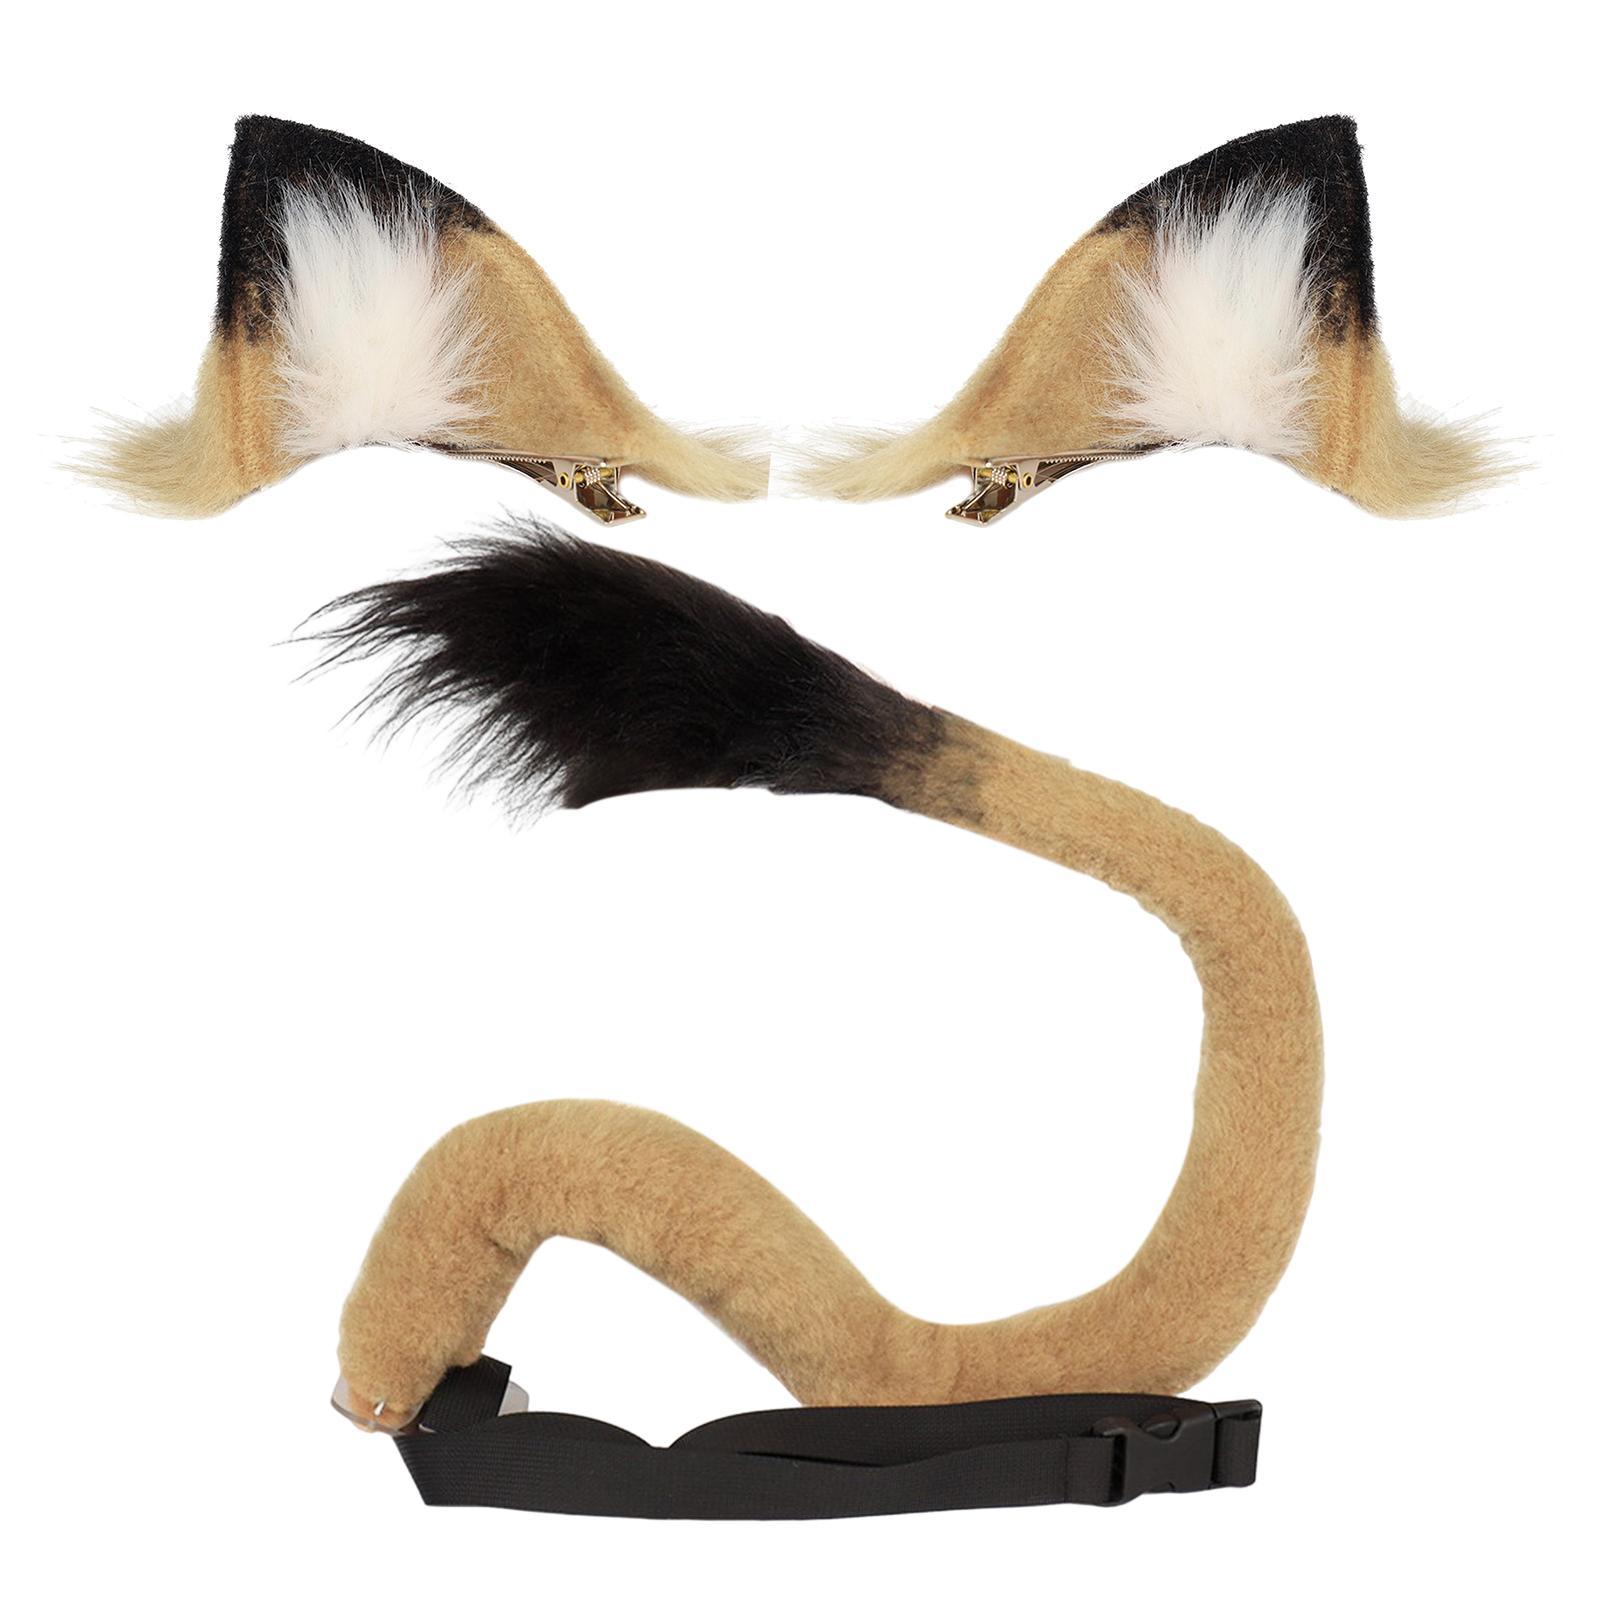 Lion Ear and Tail Set for Women Girls Lolita Cosplay for Costume Accessory